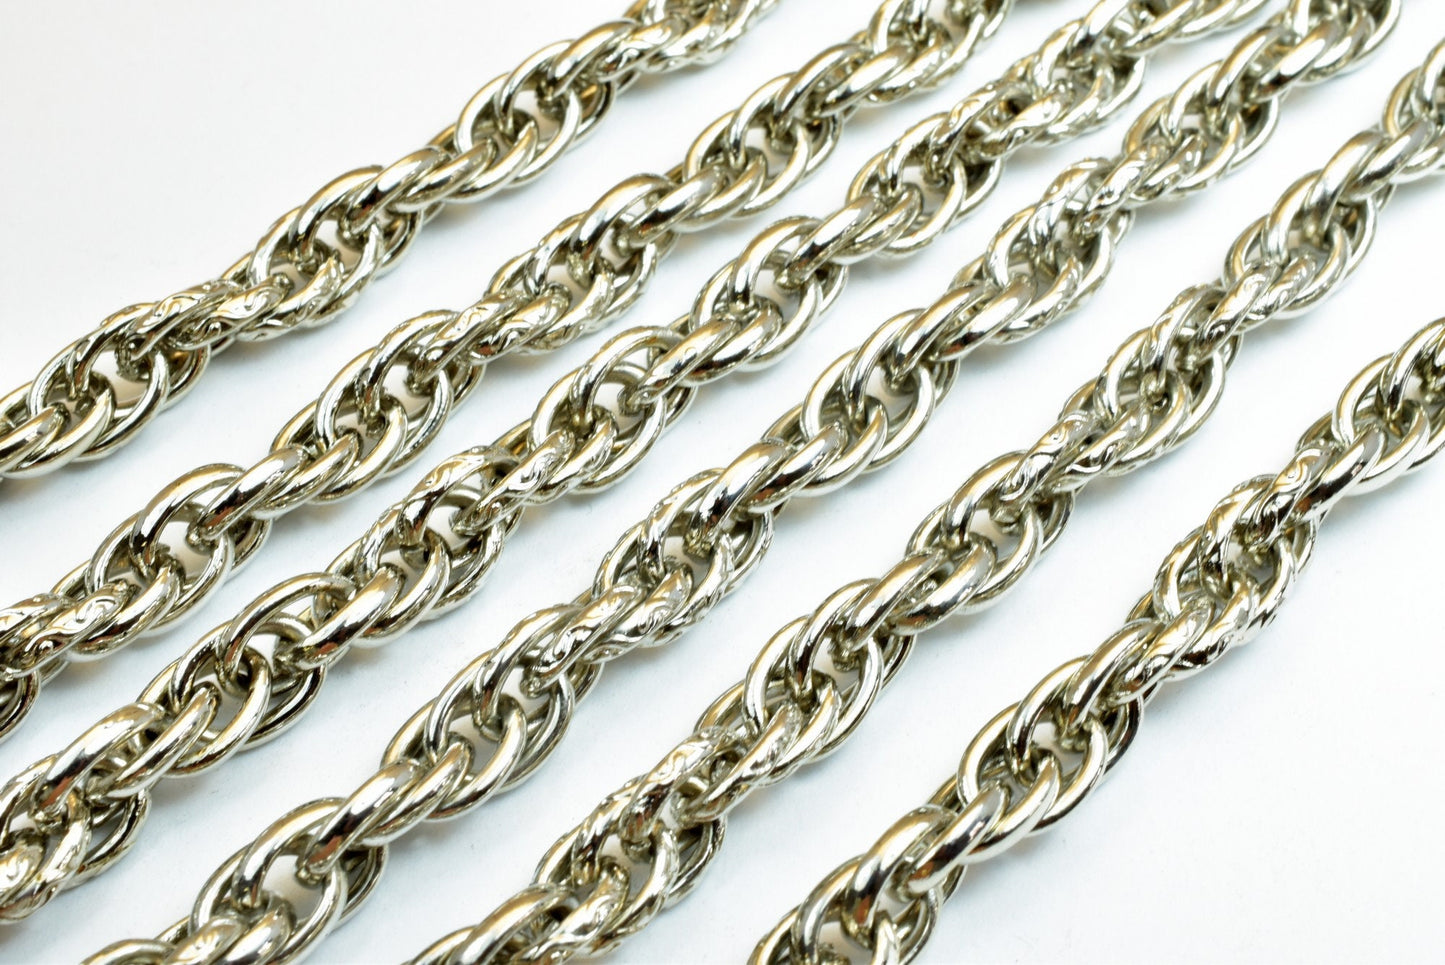 Rope Rhodium Filled White Gold Filled Diamond Cut Chain 22" Inch, Size 8mm CS12 For Jewelry Making